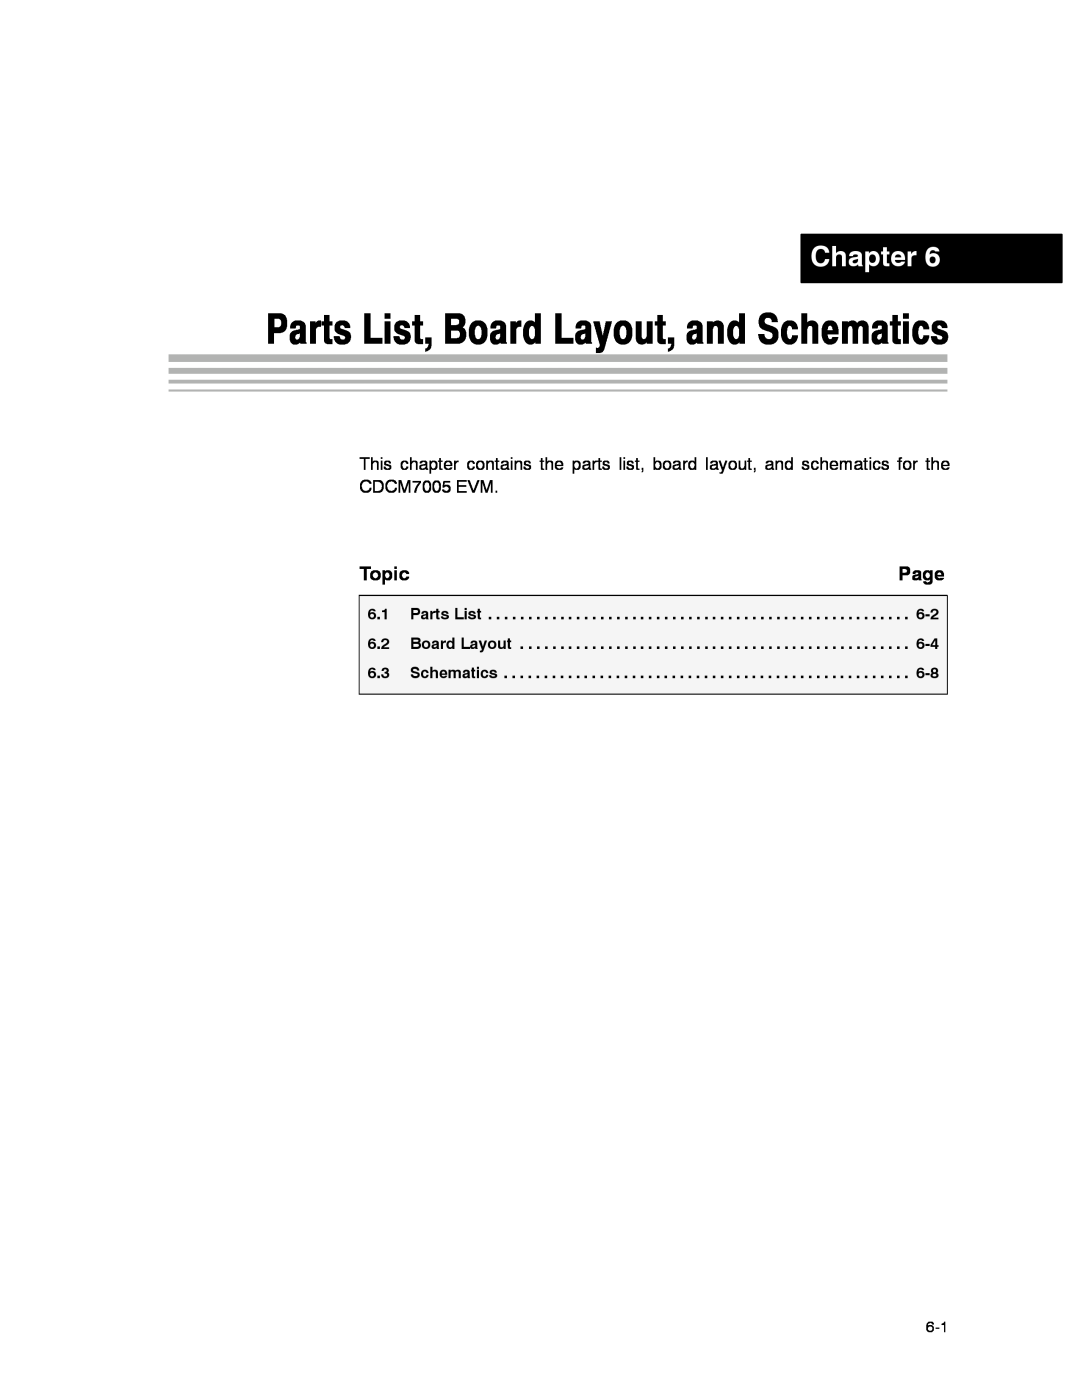 Texas Instruments CDCM7005 manual Parts List, Board Layout, and Schematics, Chapter, Page, Topic 